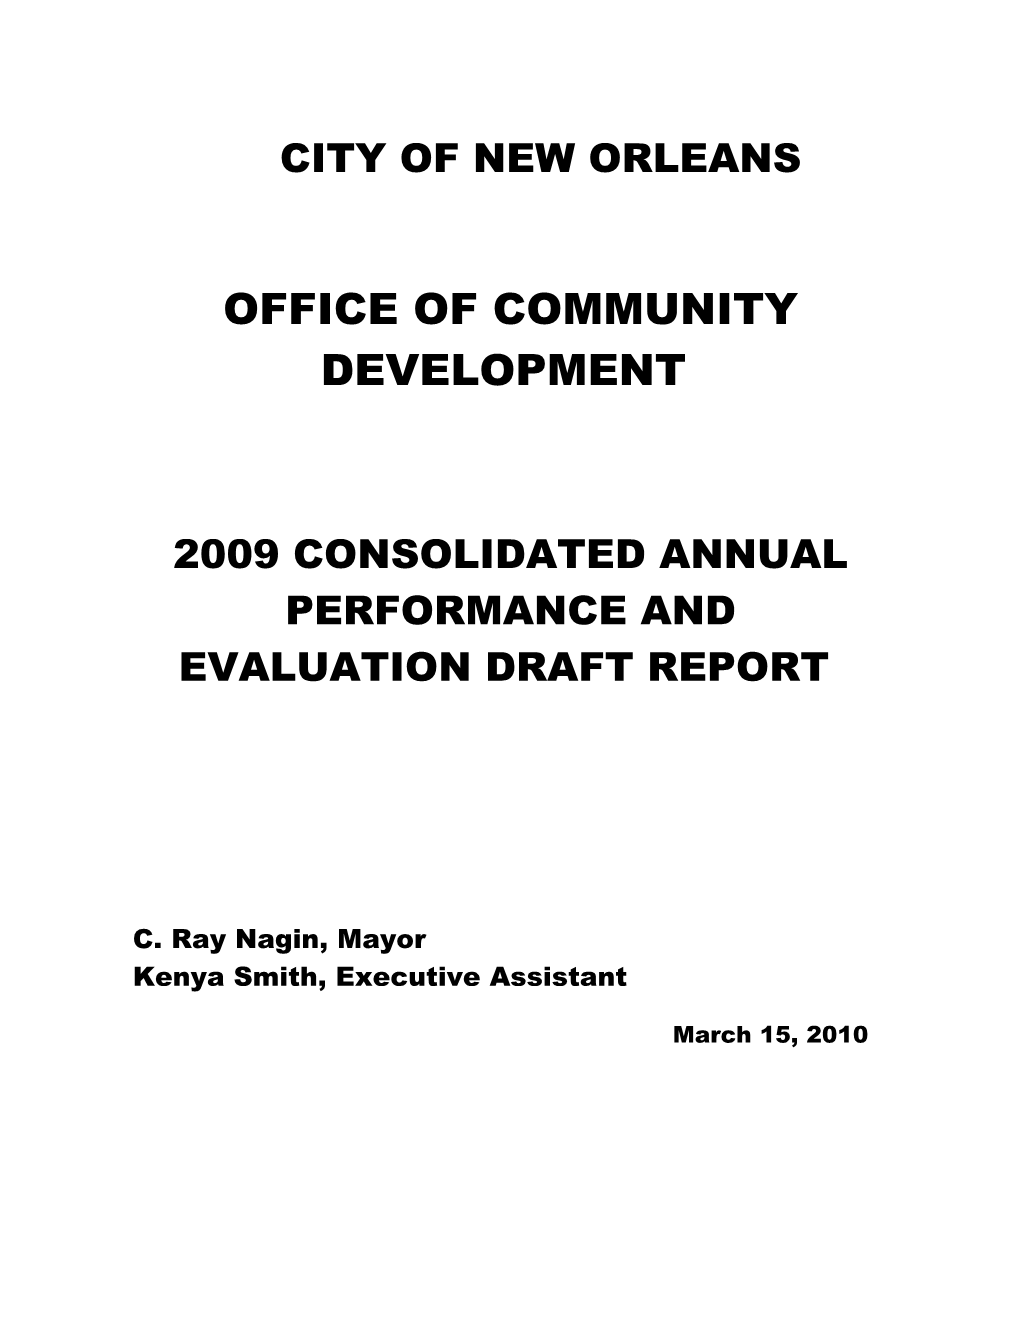 2009 Consolidated Annual Performance & Evaluation Draft Report